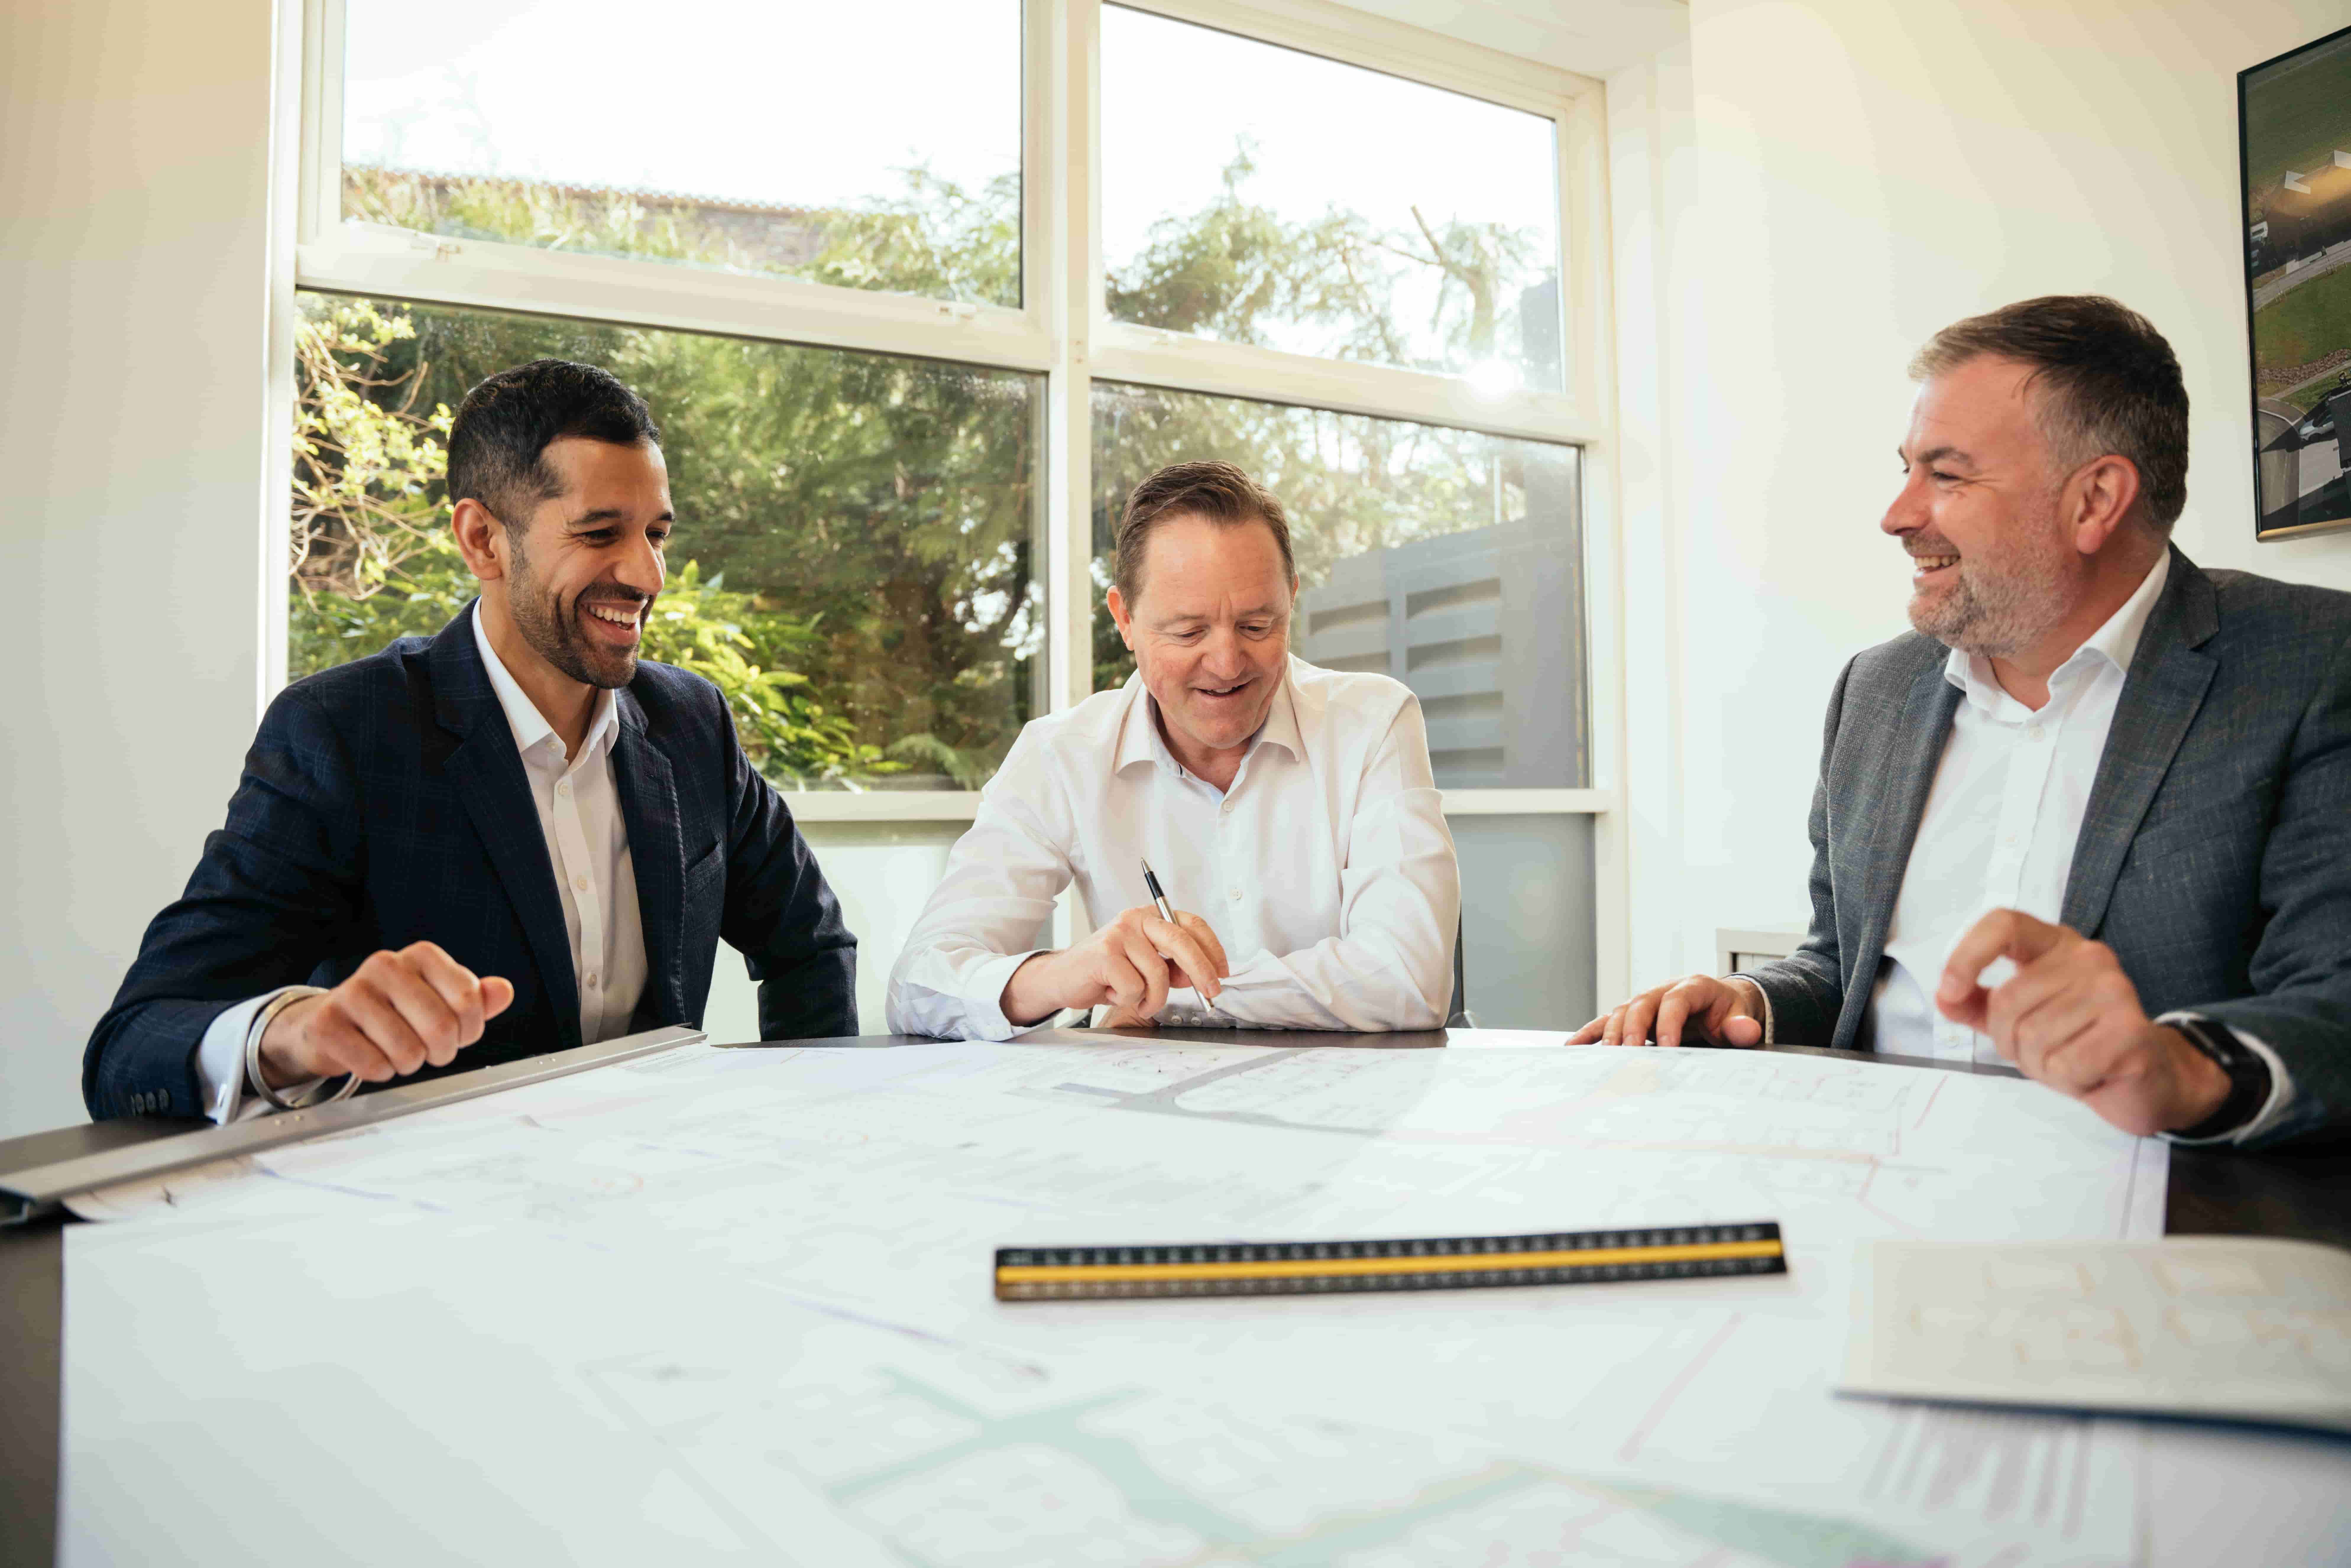 Group Director, Group Managing Director and CFO of Elivia Homes